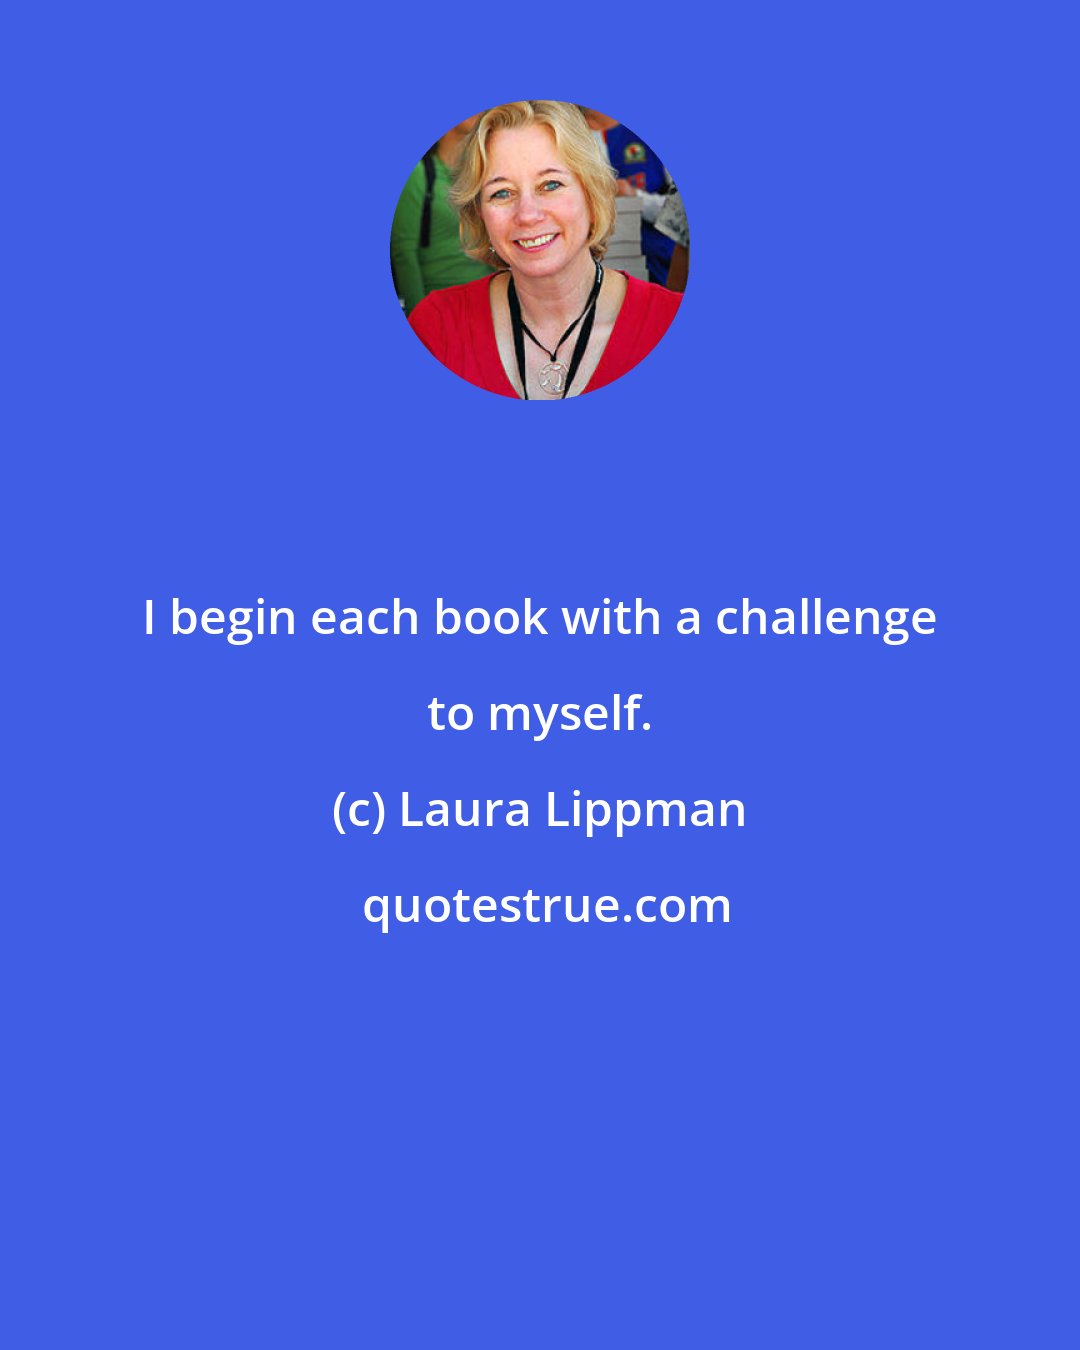 Laura Lippman: I begin each book with a challenge to myself.